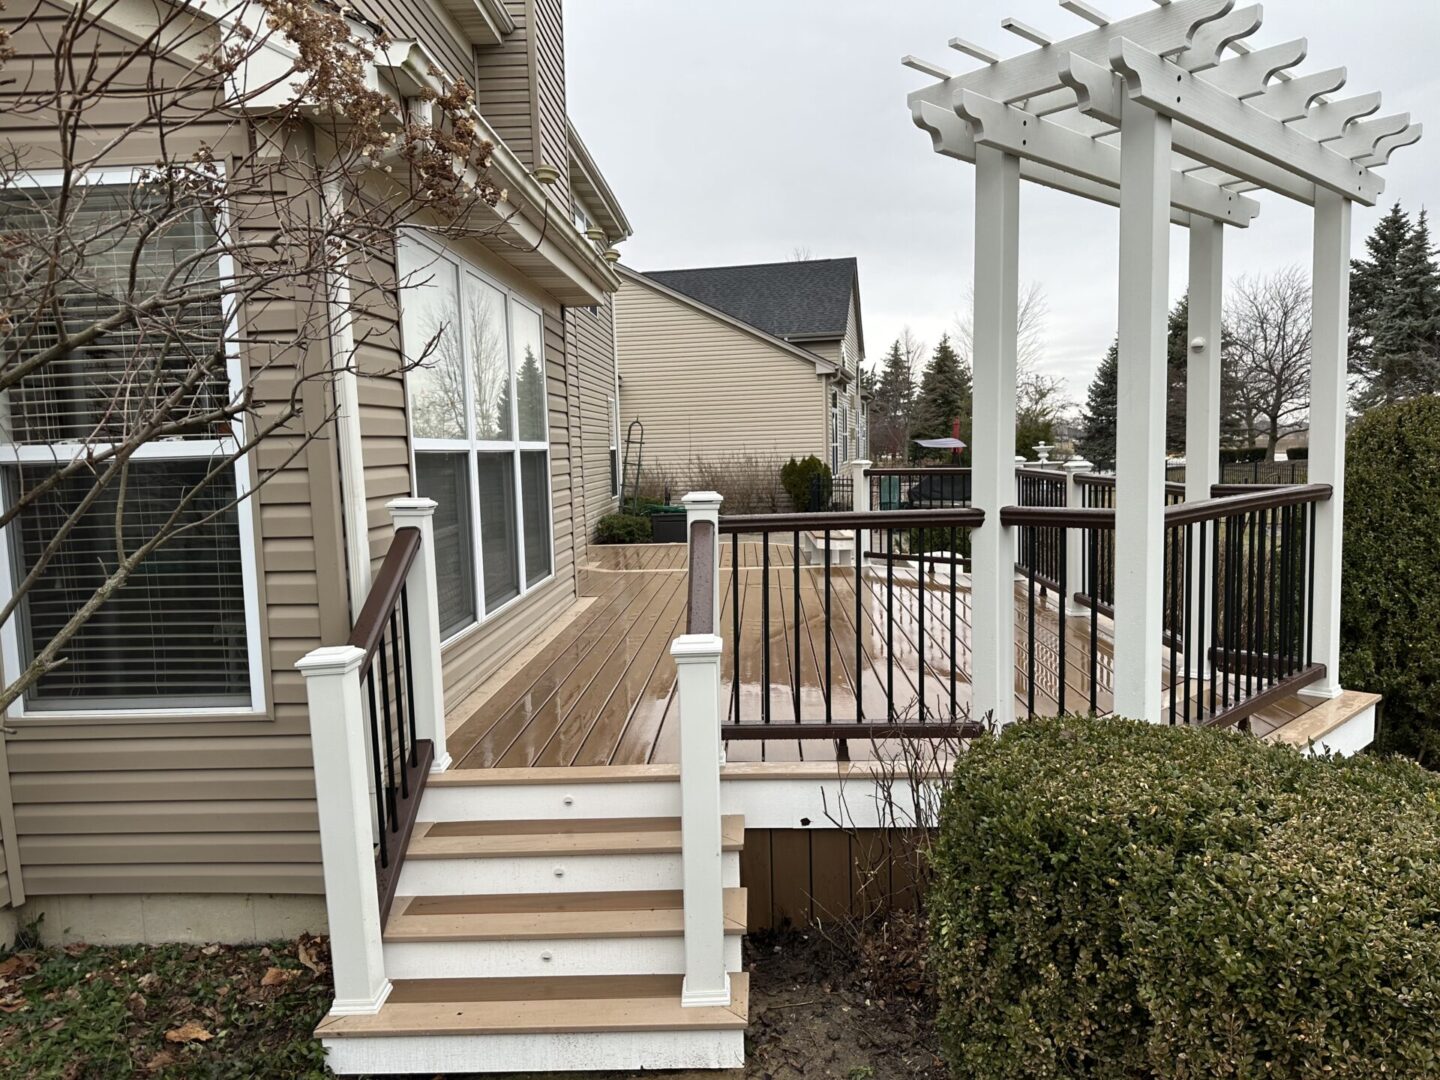 A deck with steps and a pergola in the background.